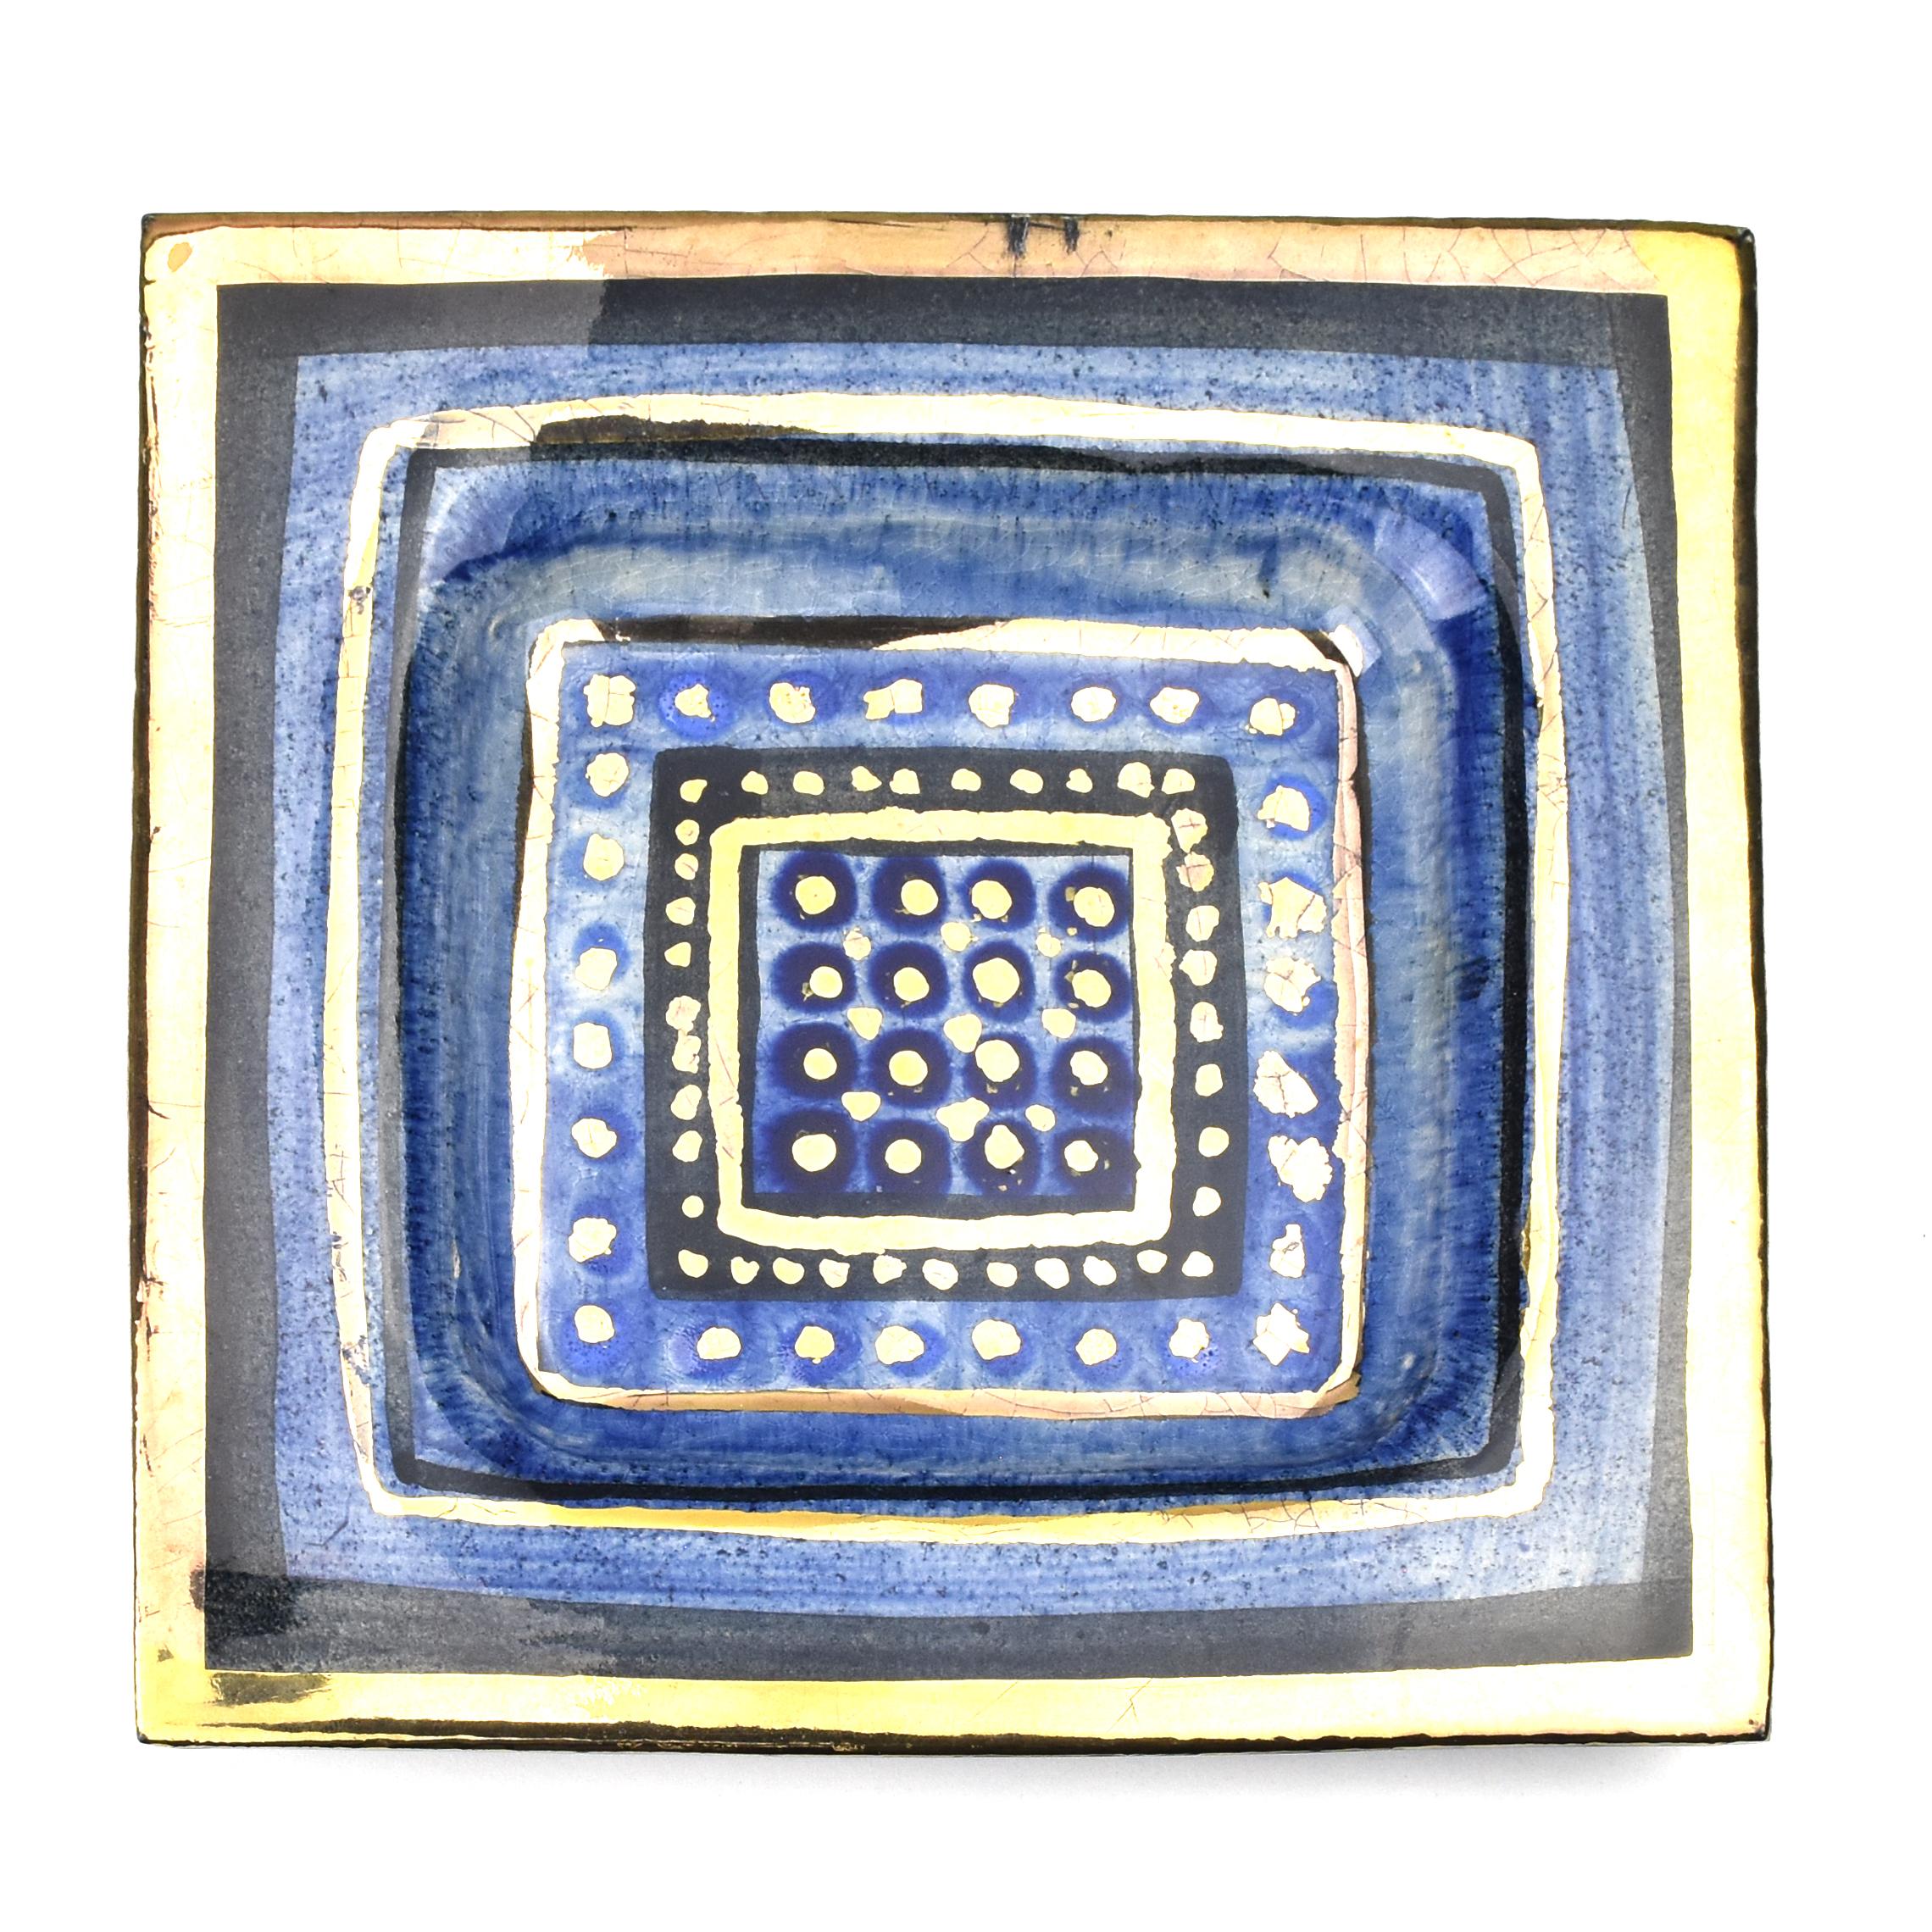 Decorative ceramic dish or vide-poche by ceramicist Georges Pelletier, France.

Handmade ceramic bowl, with an attractive design in shades of blue with black lines and gold-lustre details and a glossy finish. Mounted with a hanging wire for display,